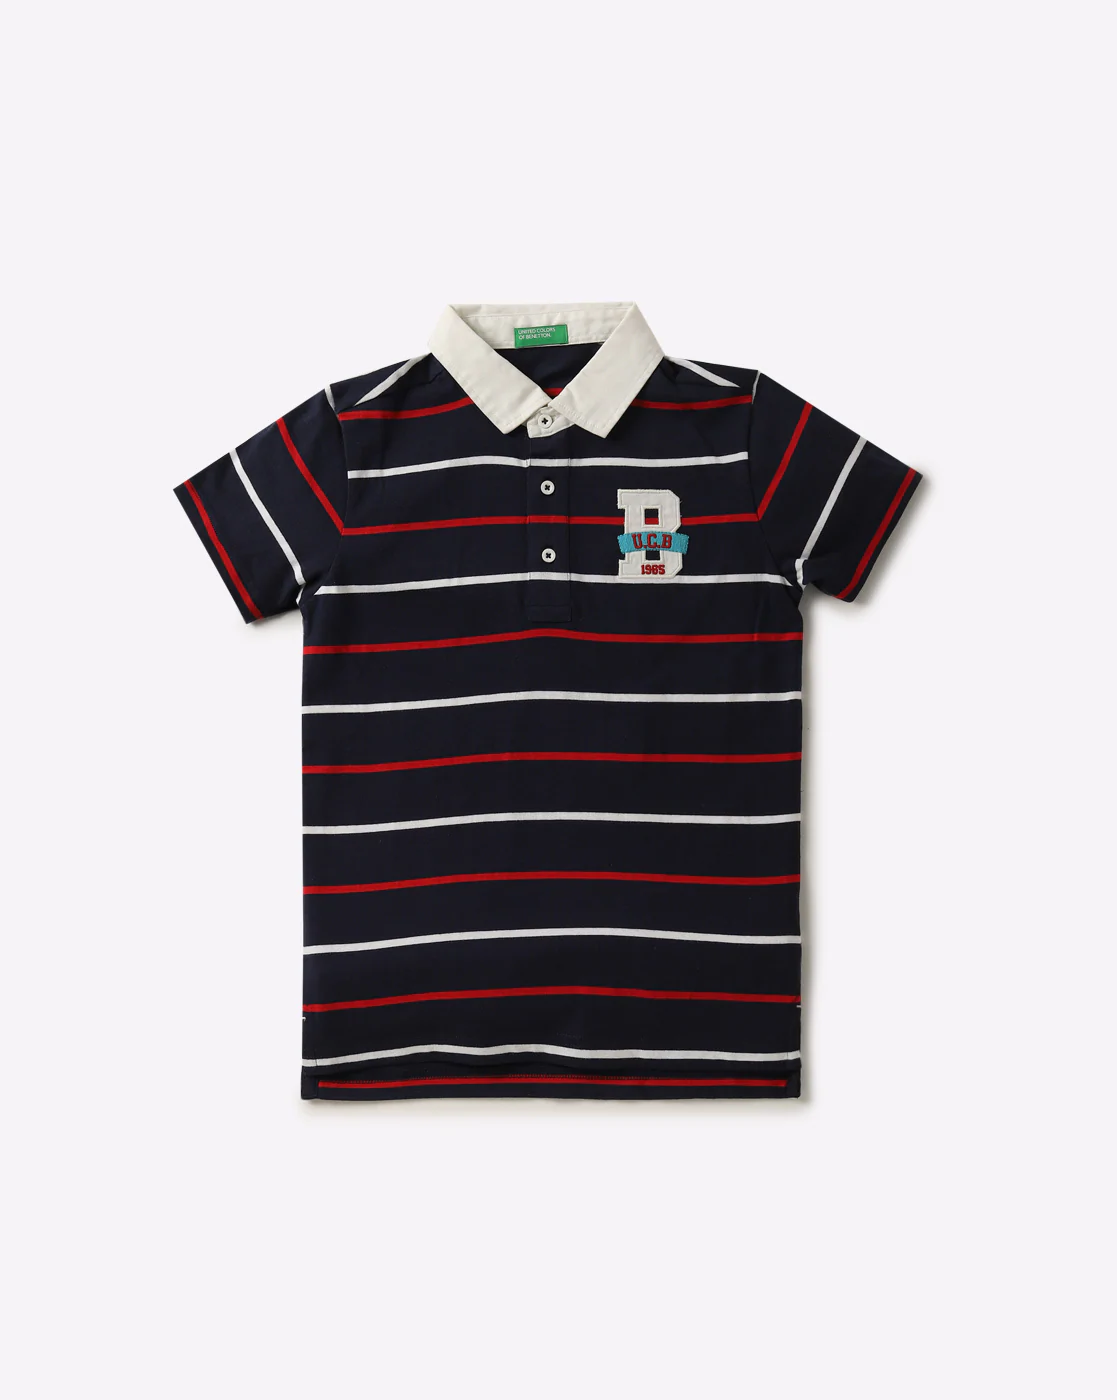 Striped Polo T Shirt With Brand Applique Wholesale Supplier Bangladesh